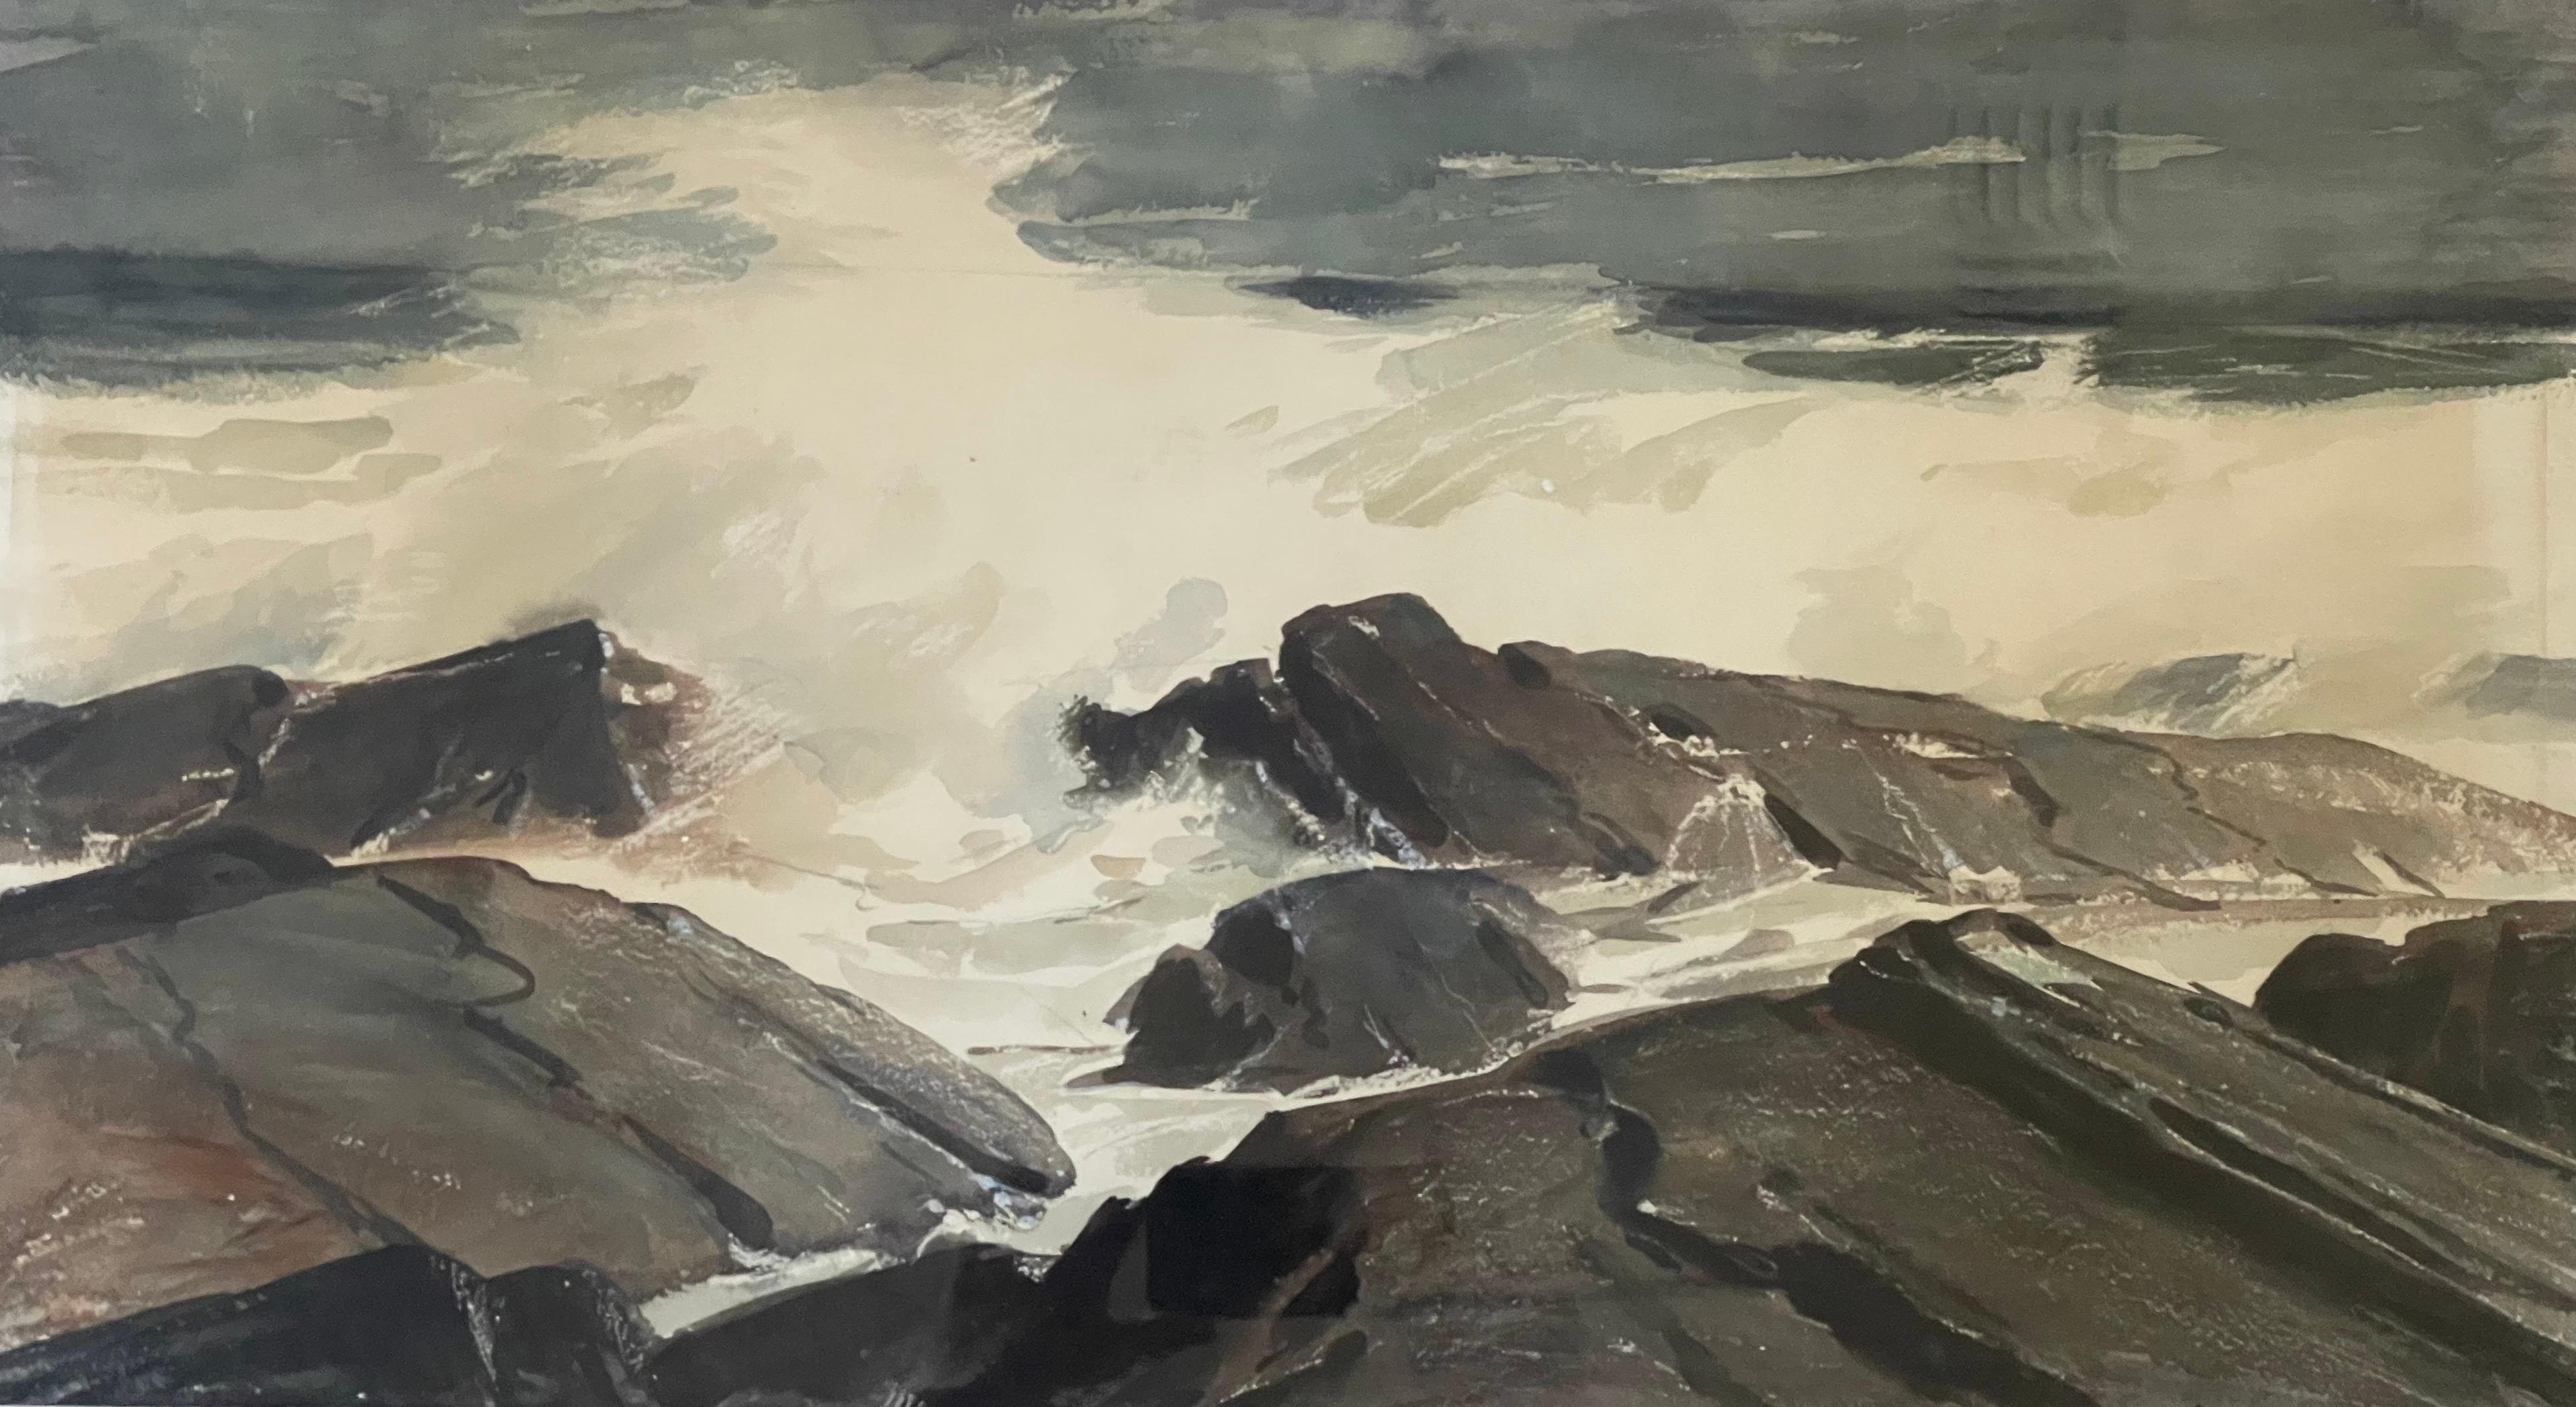 Stunning original seascape watercolor painting by listed artist Harry Russell Ballinger circa 1950's. The piece is in great condition and measures 35.75